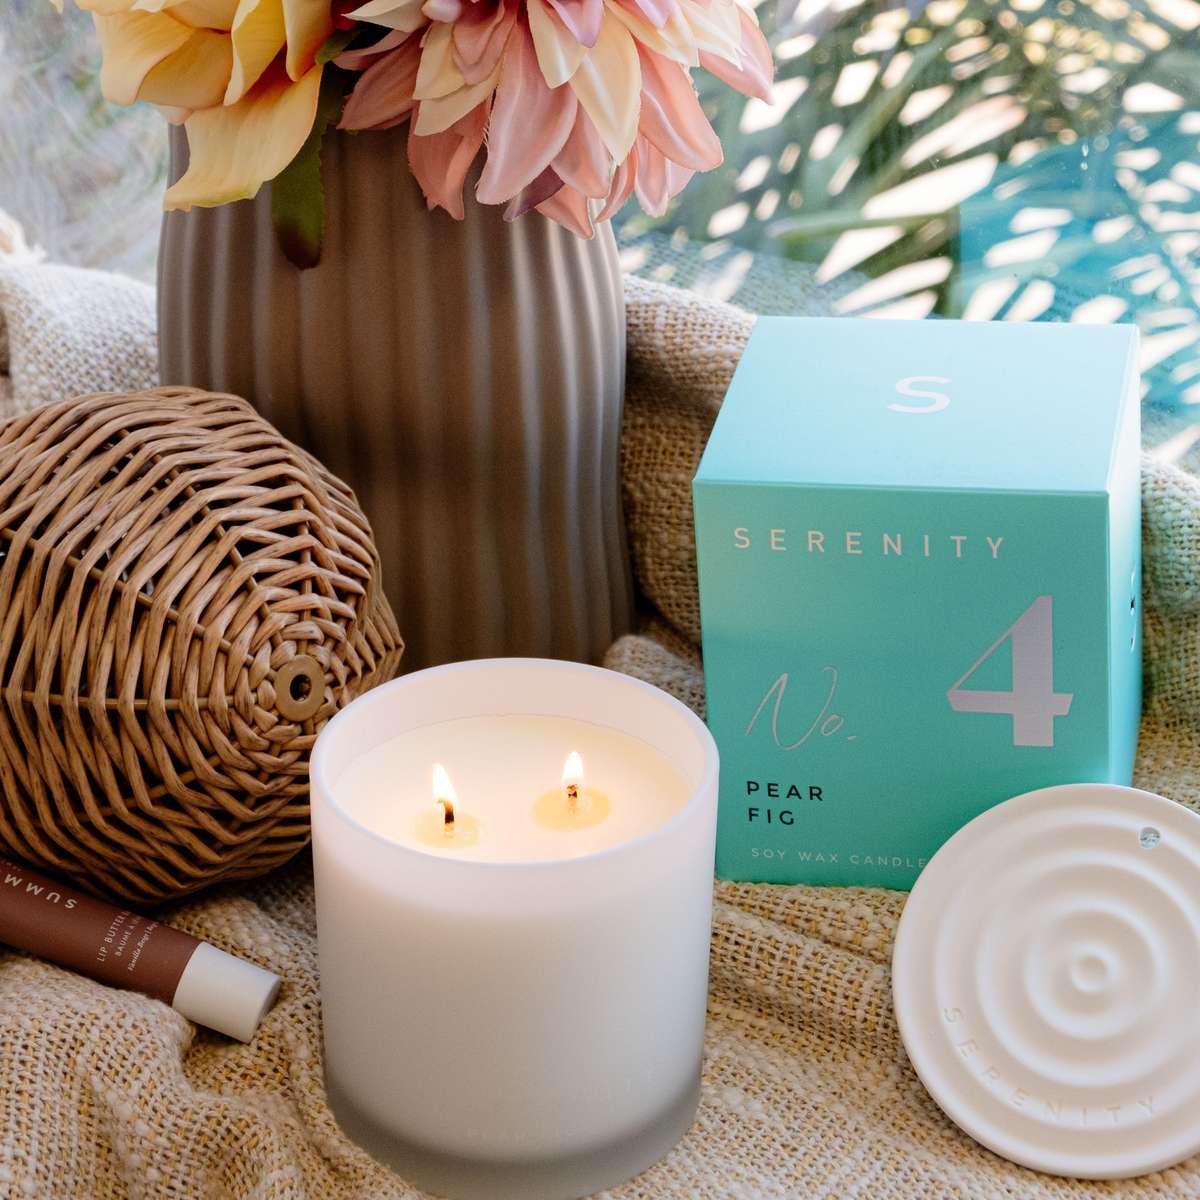 Serenity Numbered Core Candle and Fragrant Disc